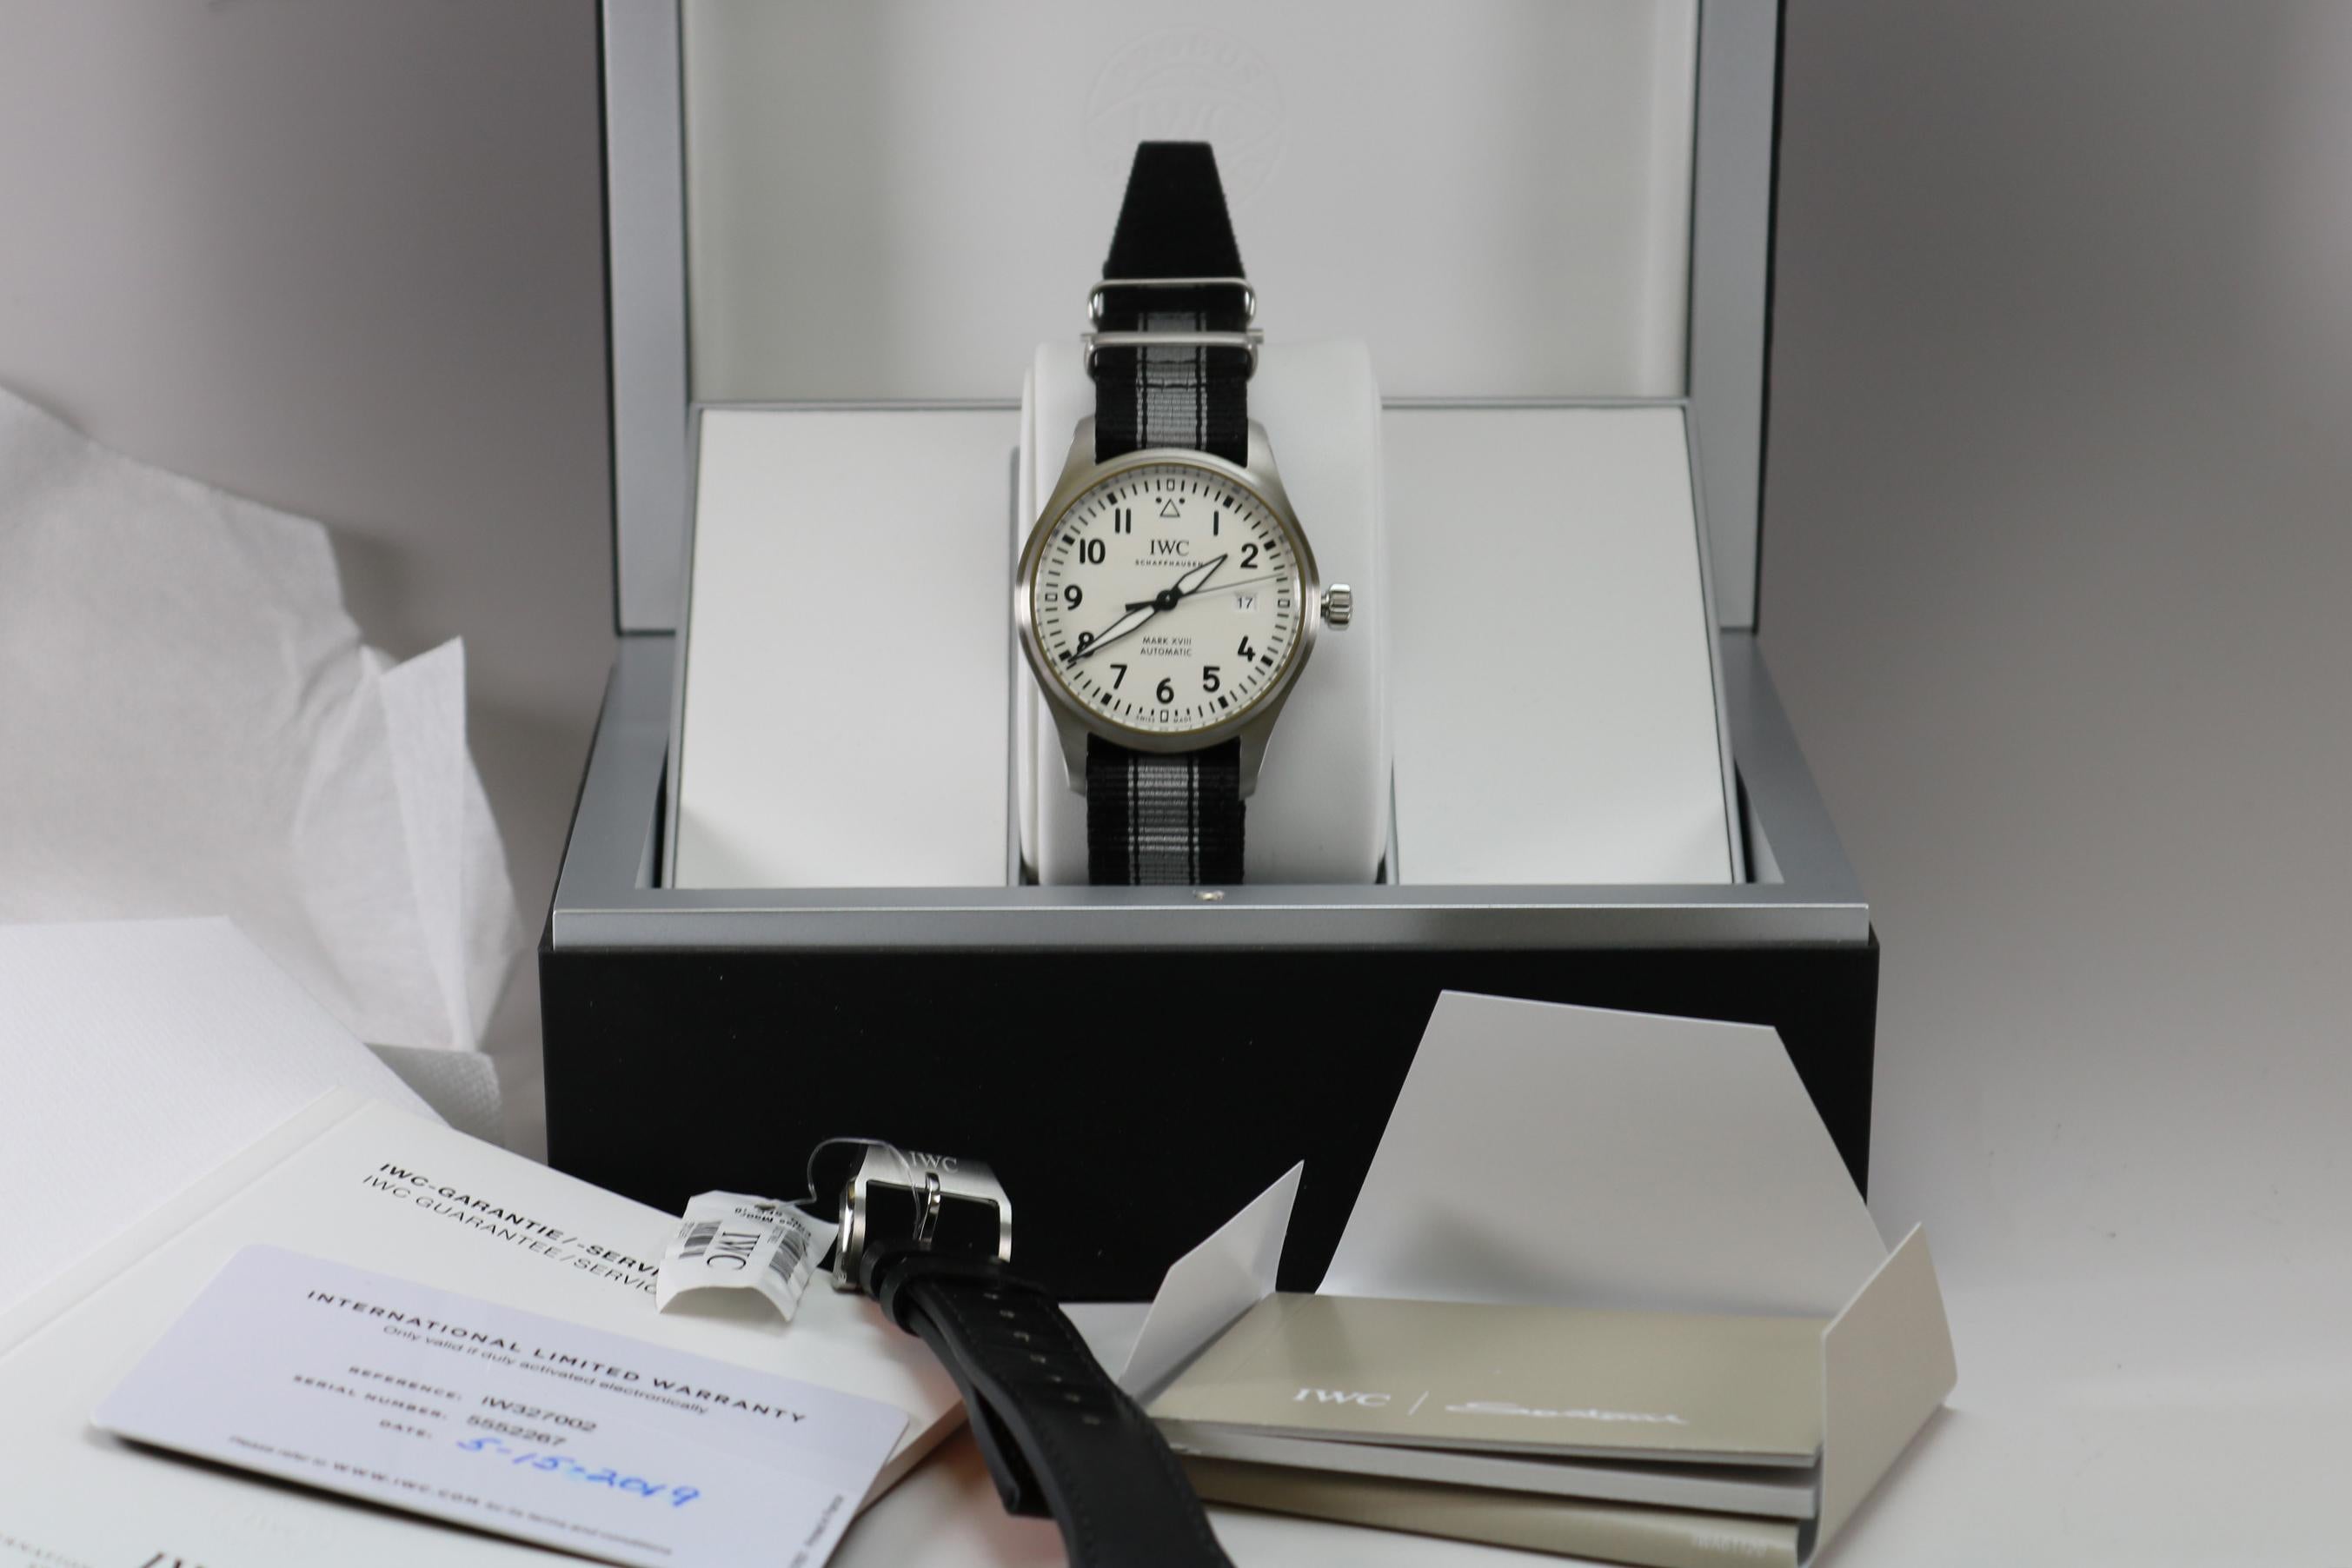 IWC Pilot's Watch Mark XVIII Ref IW327012 Wristwatch with box, papers, and extra strap. c. 2019